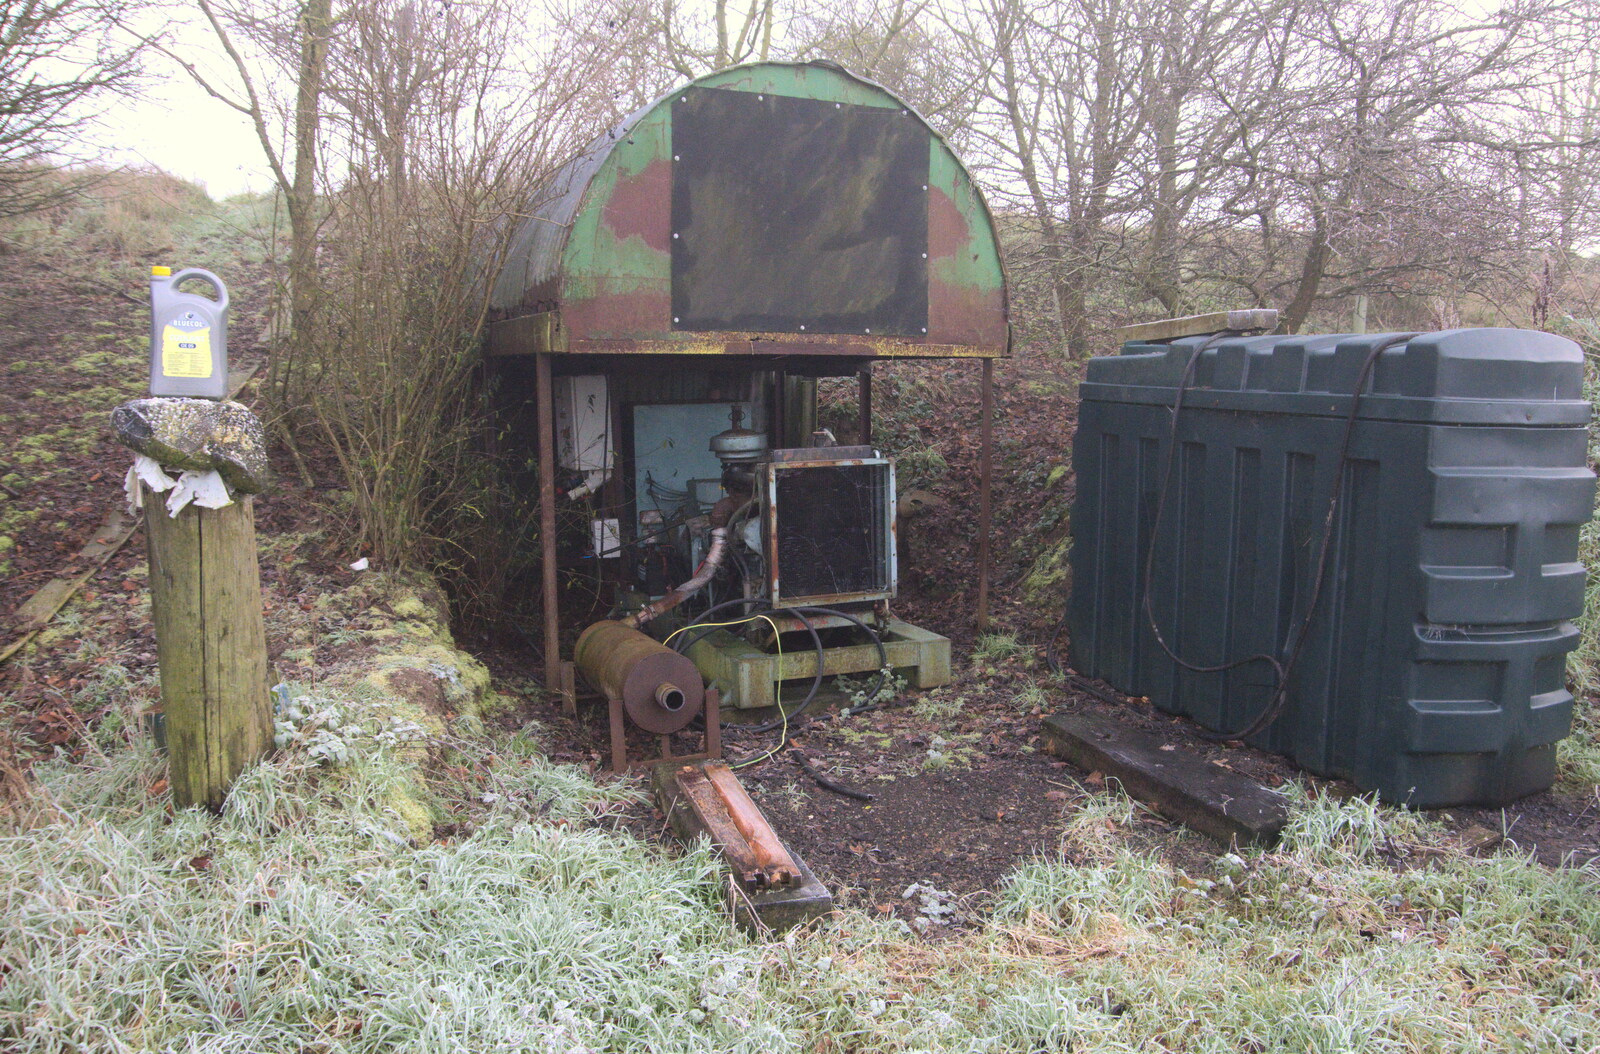 A diesel resevoir irrigation pump from Fun With Ice in Lockdown, Brome, Suffolk - 10th January 2021